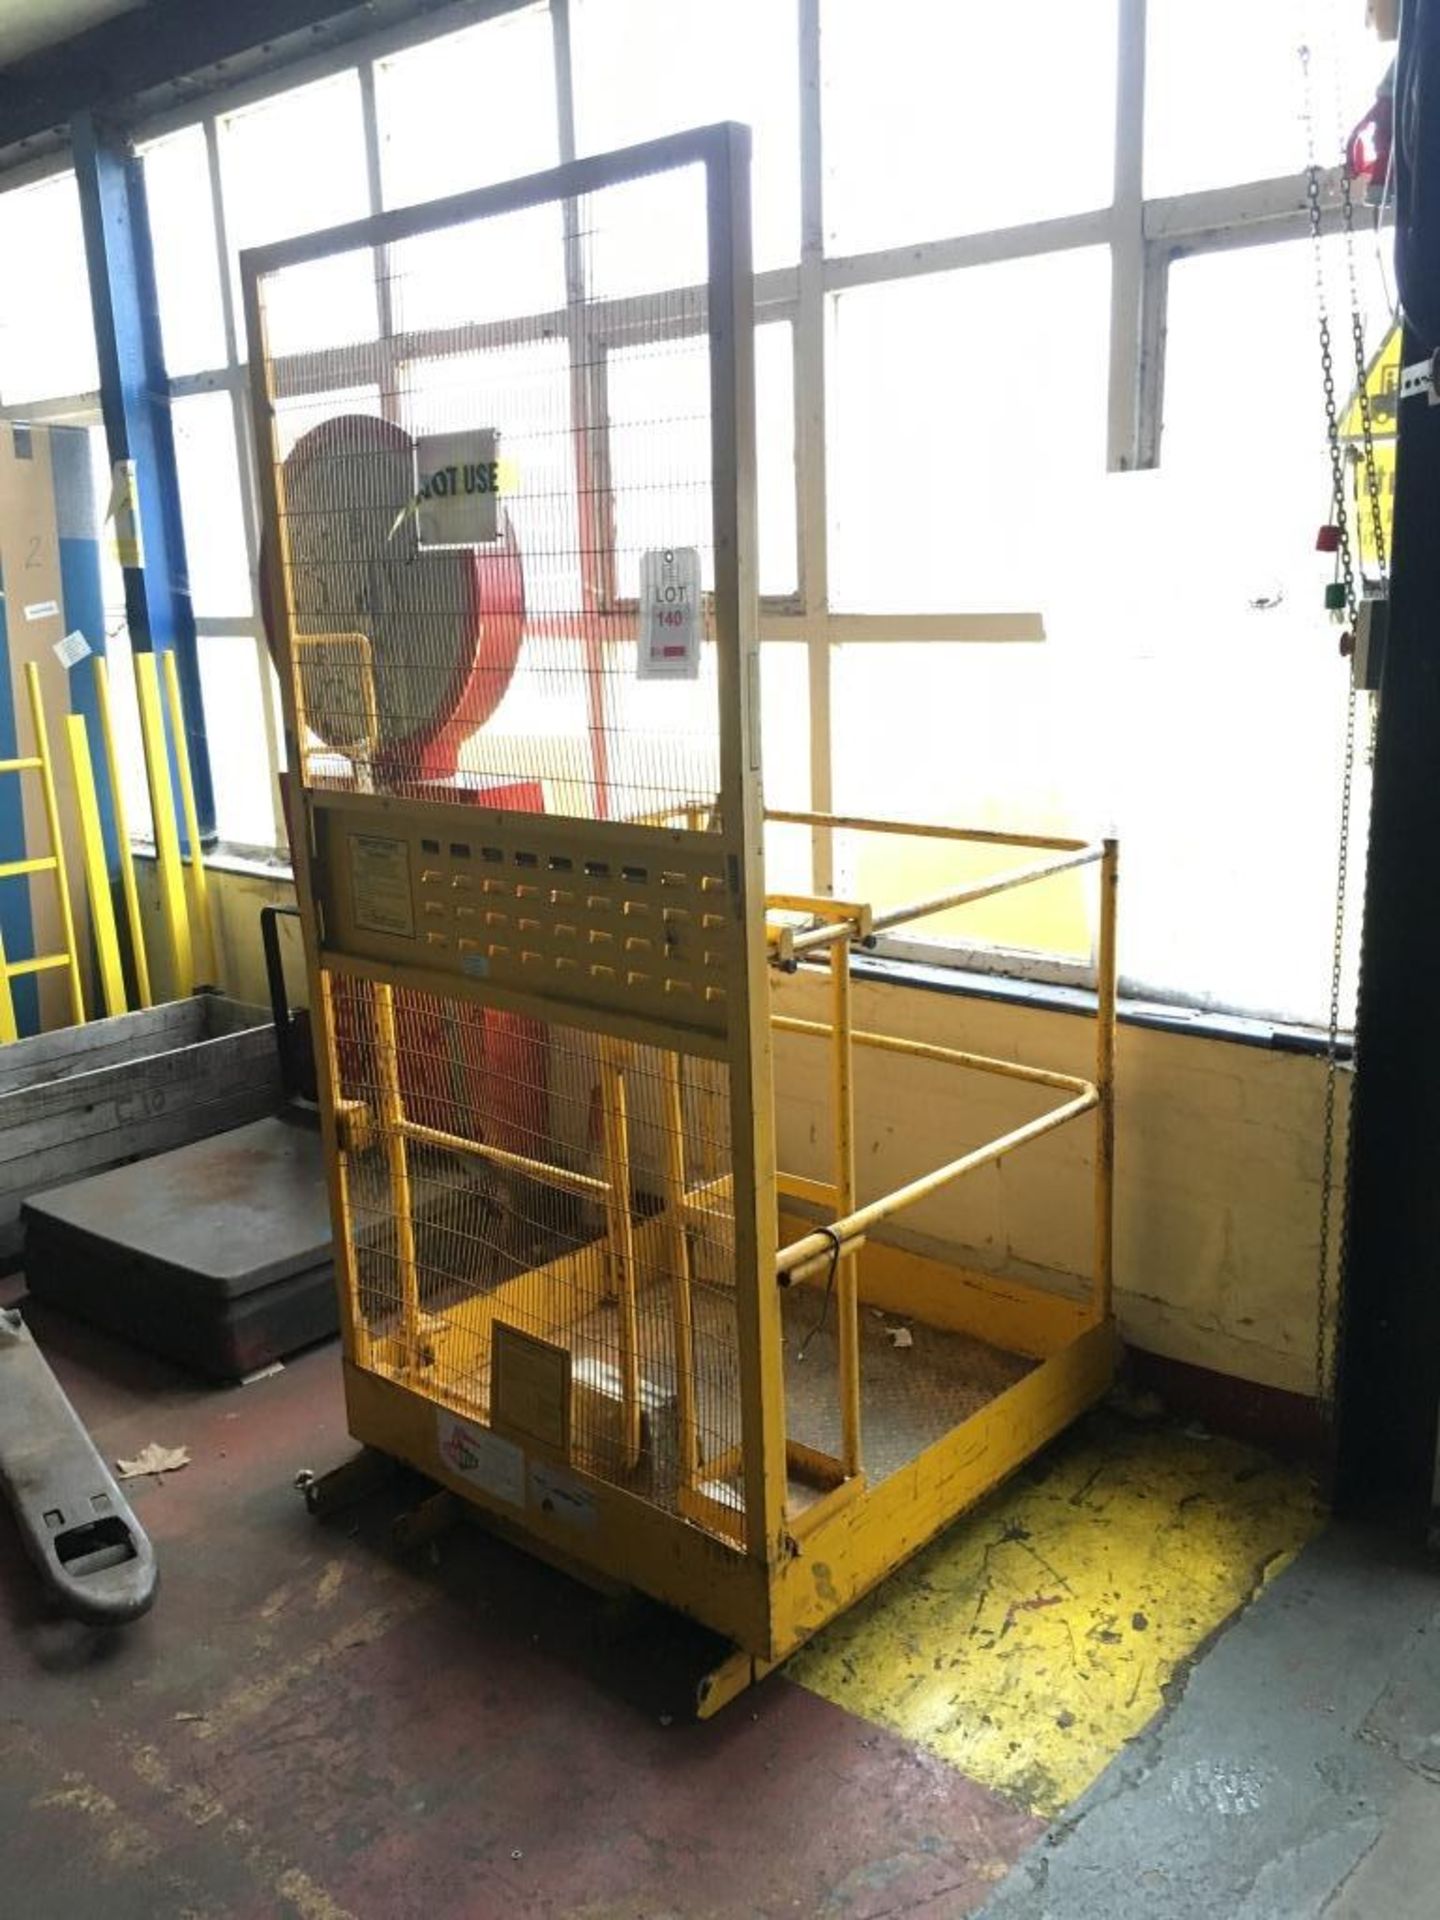 Pedestrian forklift cage. Please Note: No thorough examination certificate located. The purchaser